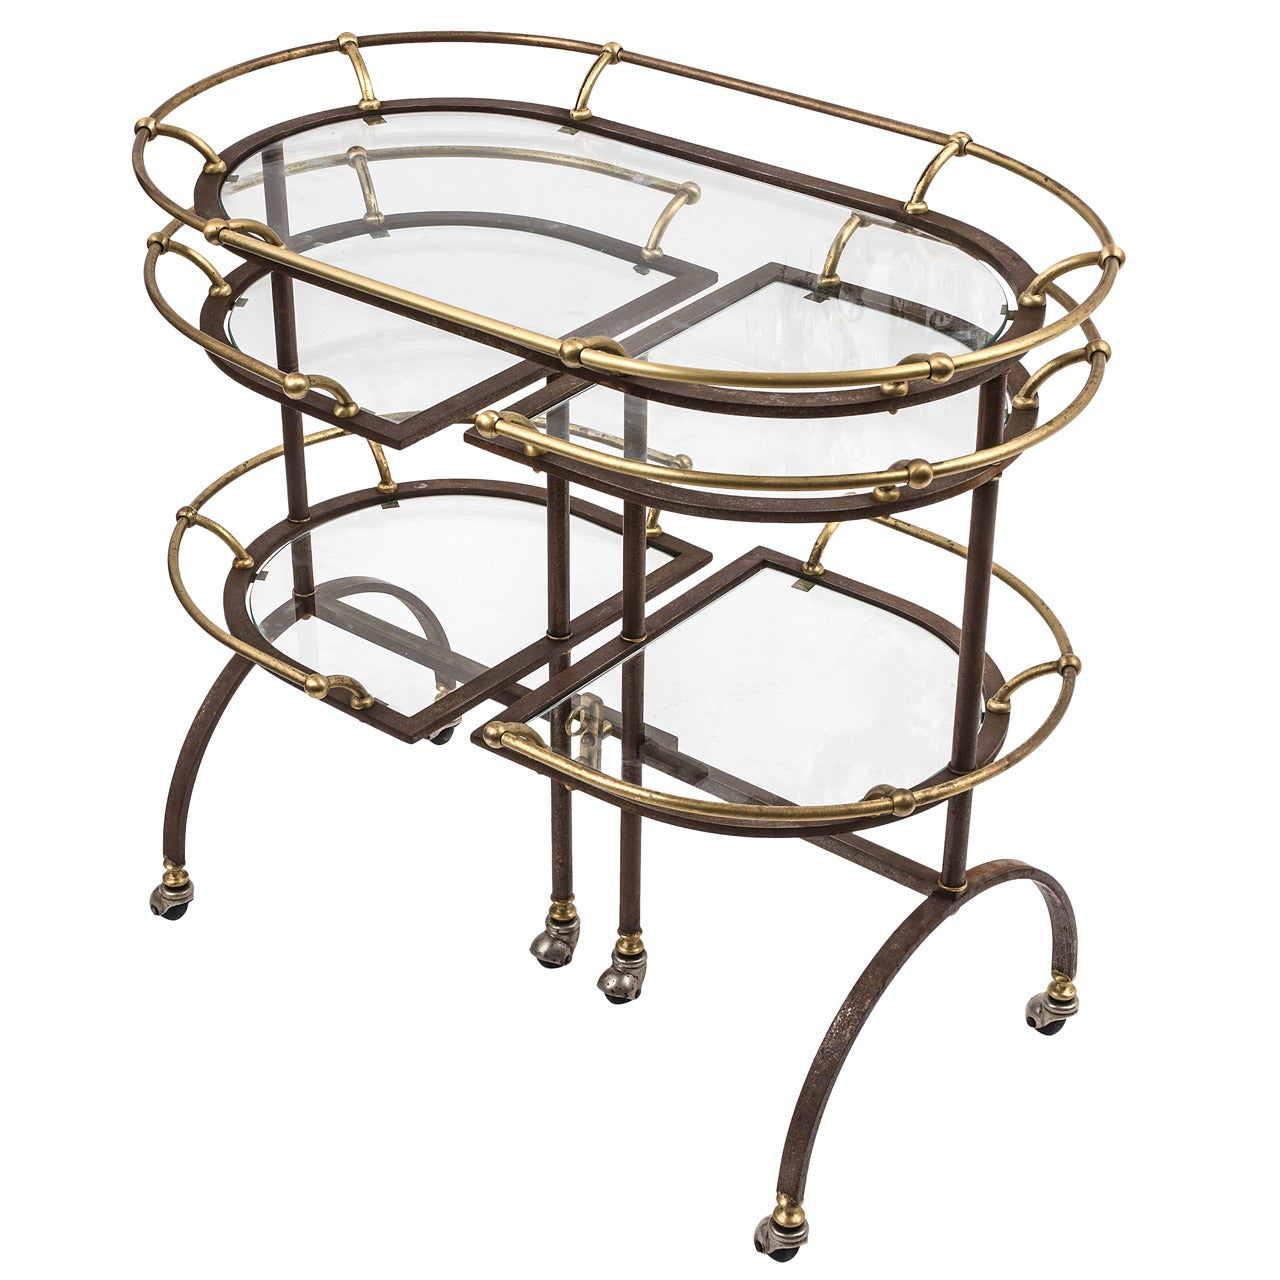 English Brass and Steel Drinks Trolley with Swiveling Shelves, circa 1950